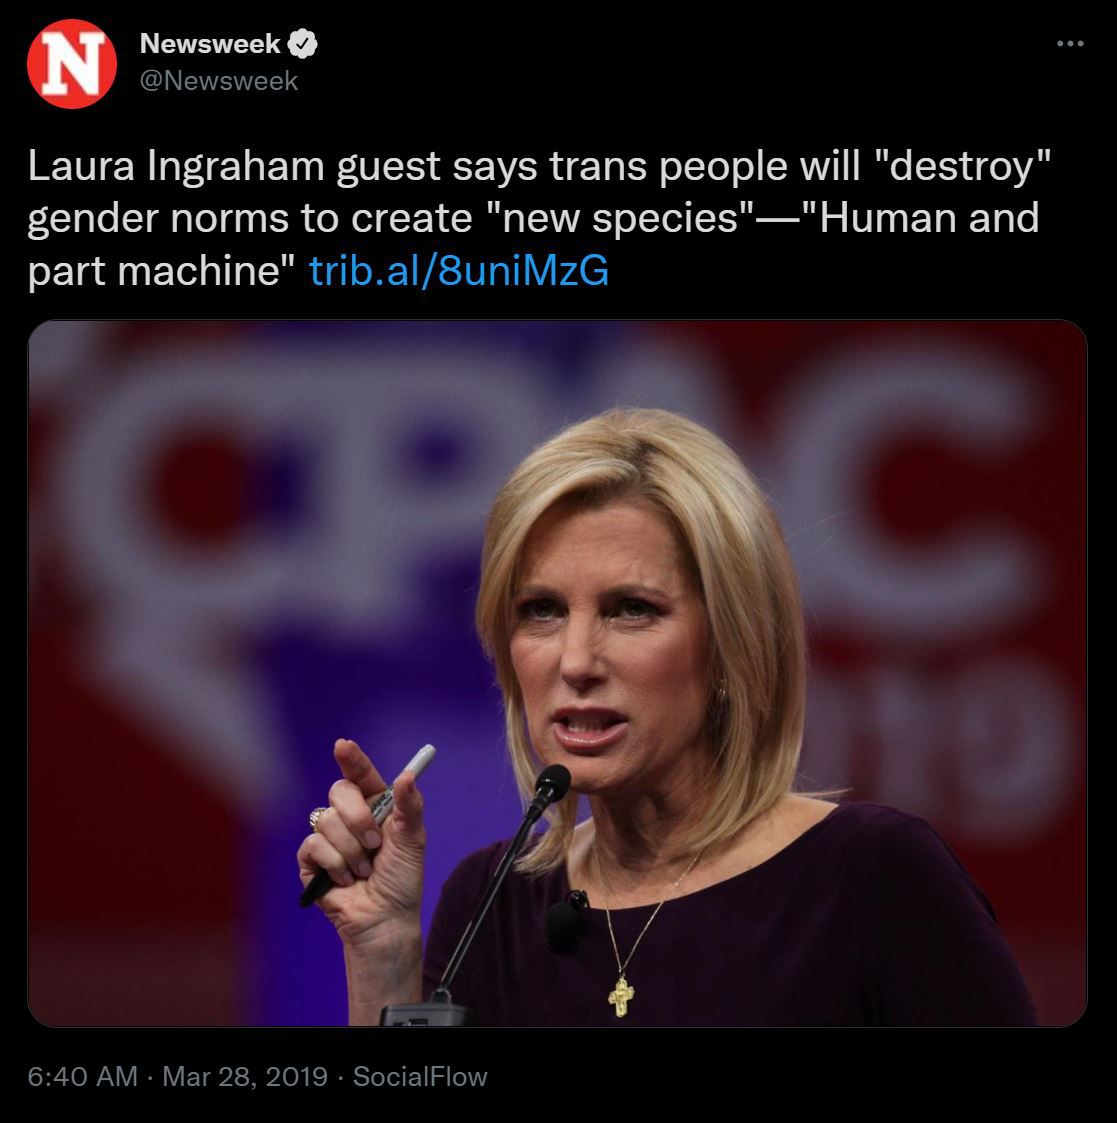 A screenshot of a tweet from Newsweek that reads: “Laura Ingraham guest says trans people will “destroy” gender norms to create ‘new species’—‘Human and part machine’”